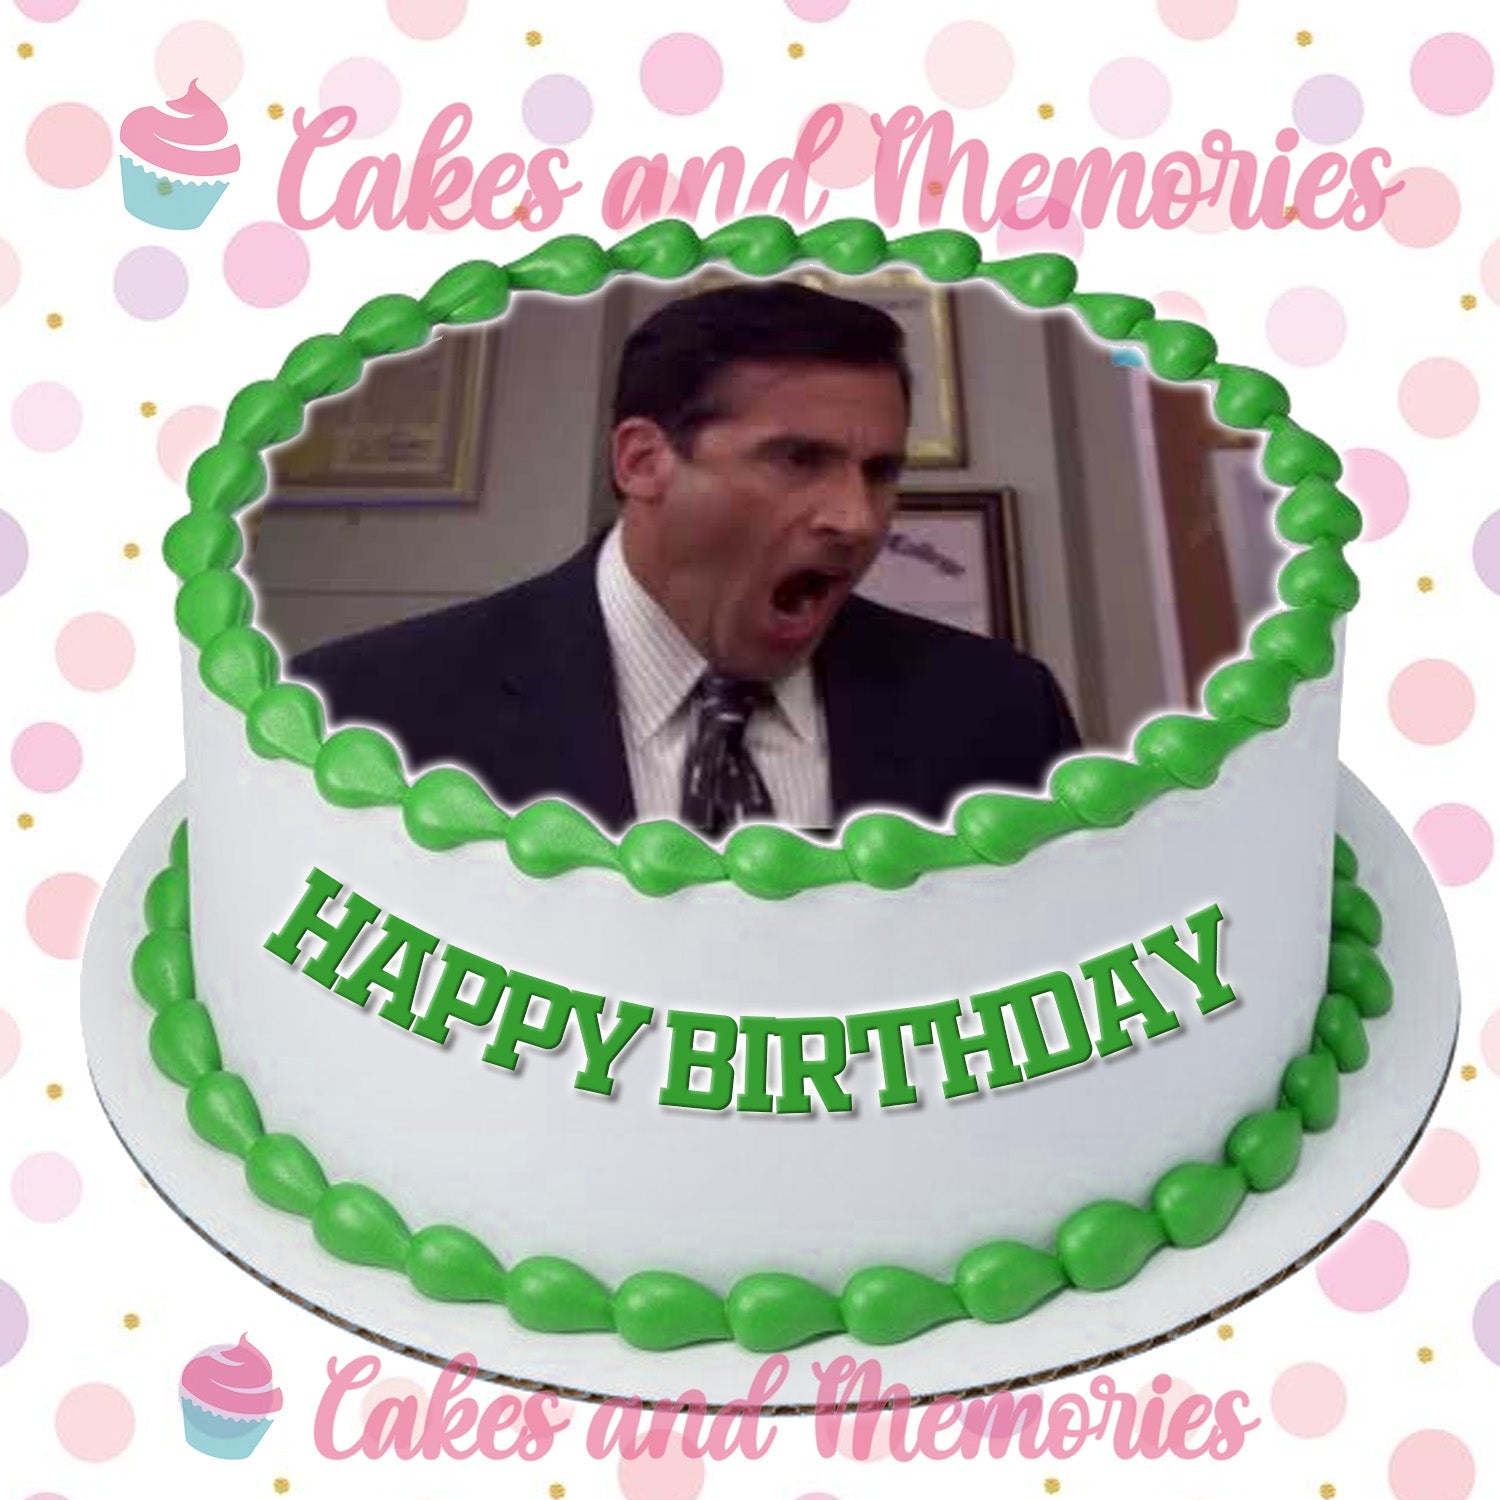 If I don't have some cake soon, I might die. : r/DunderMifflin